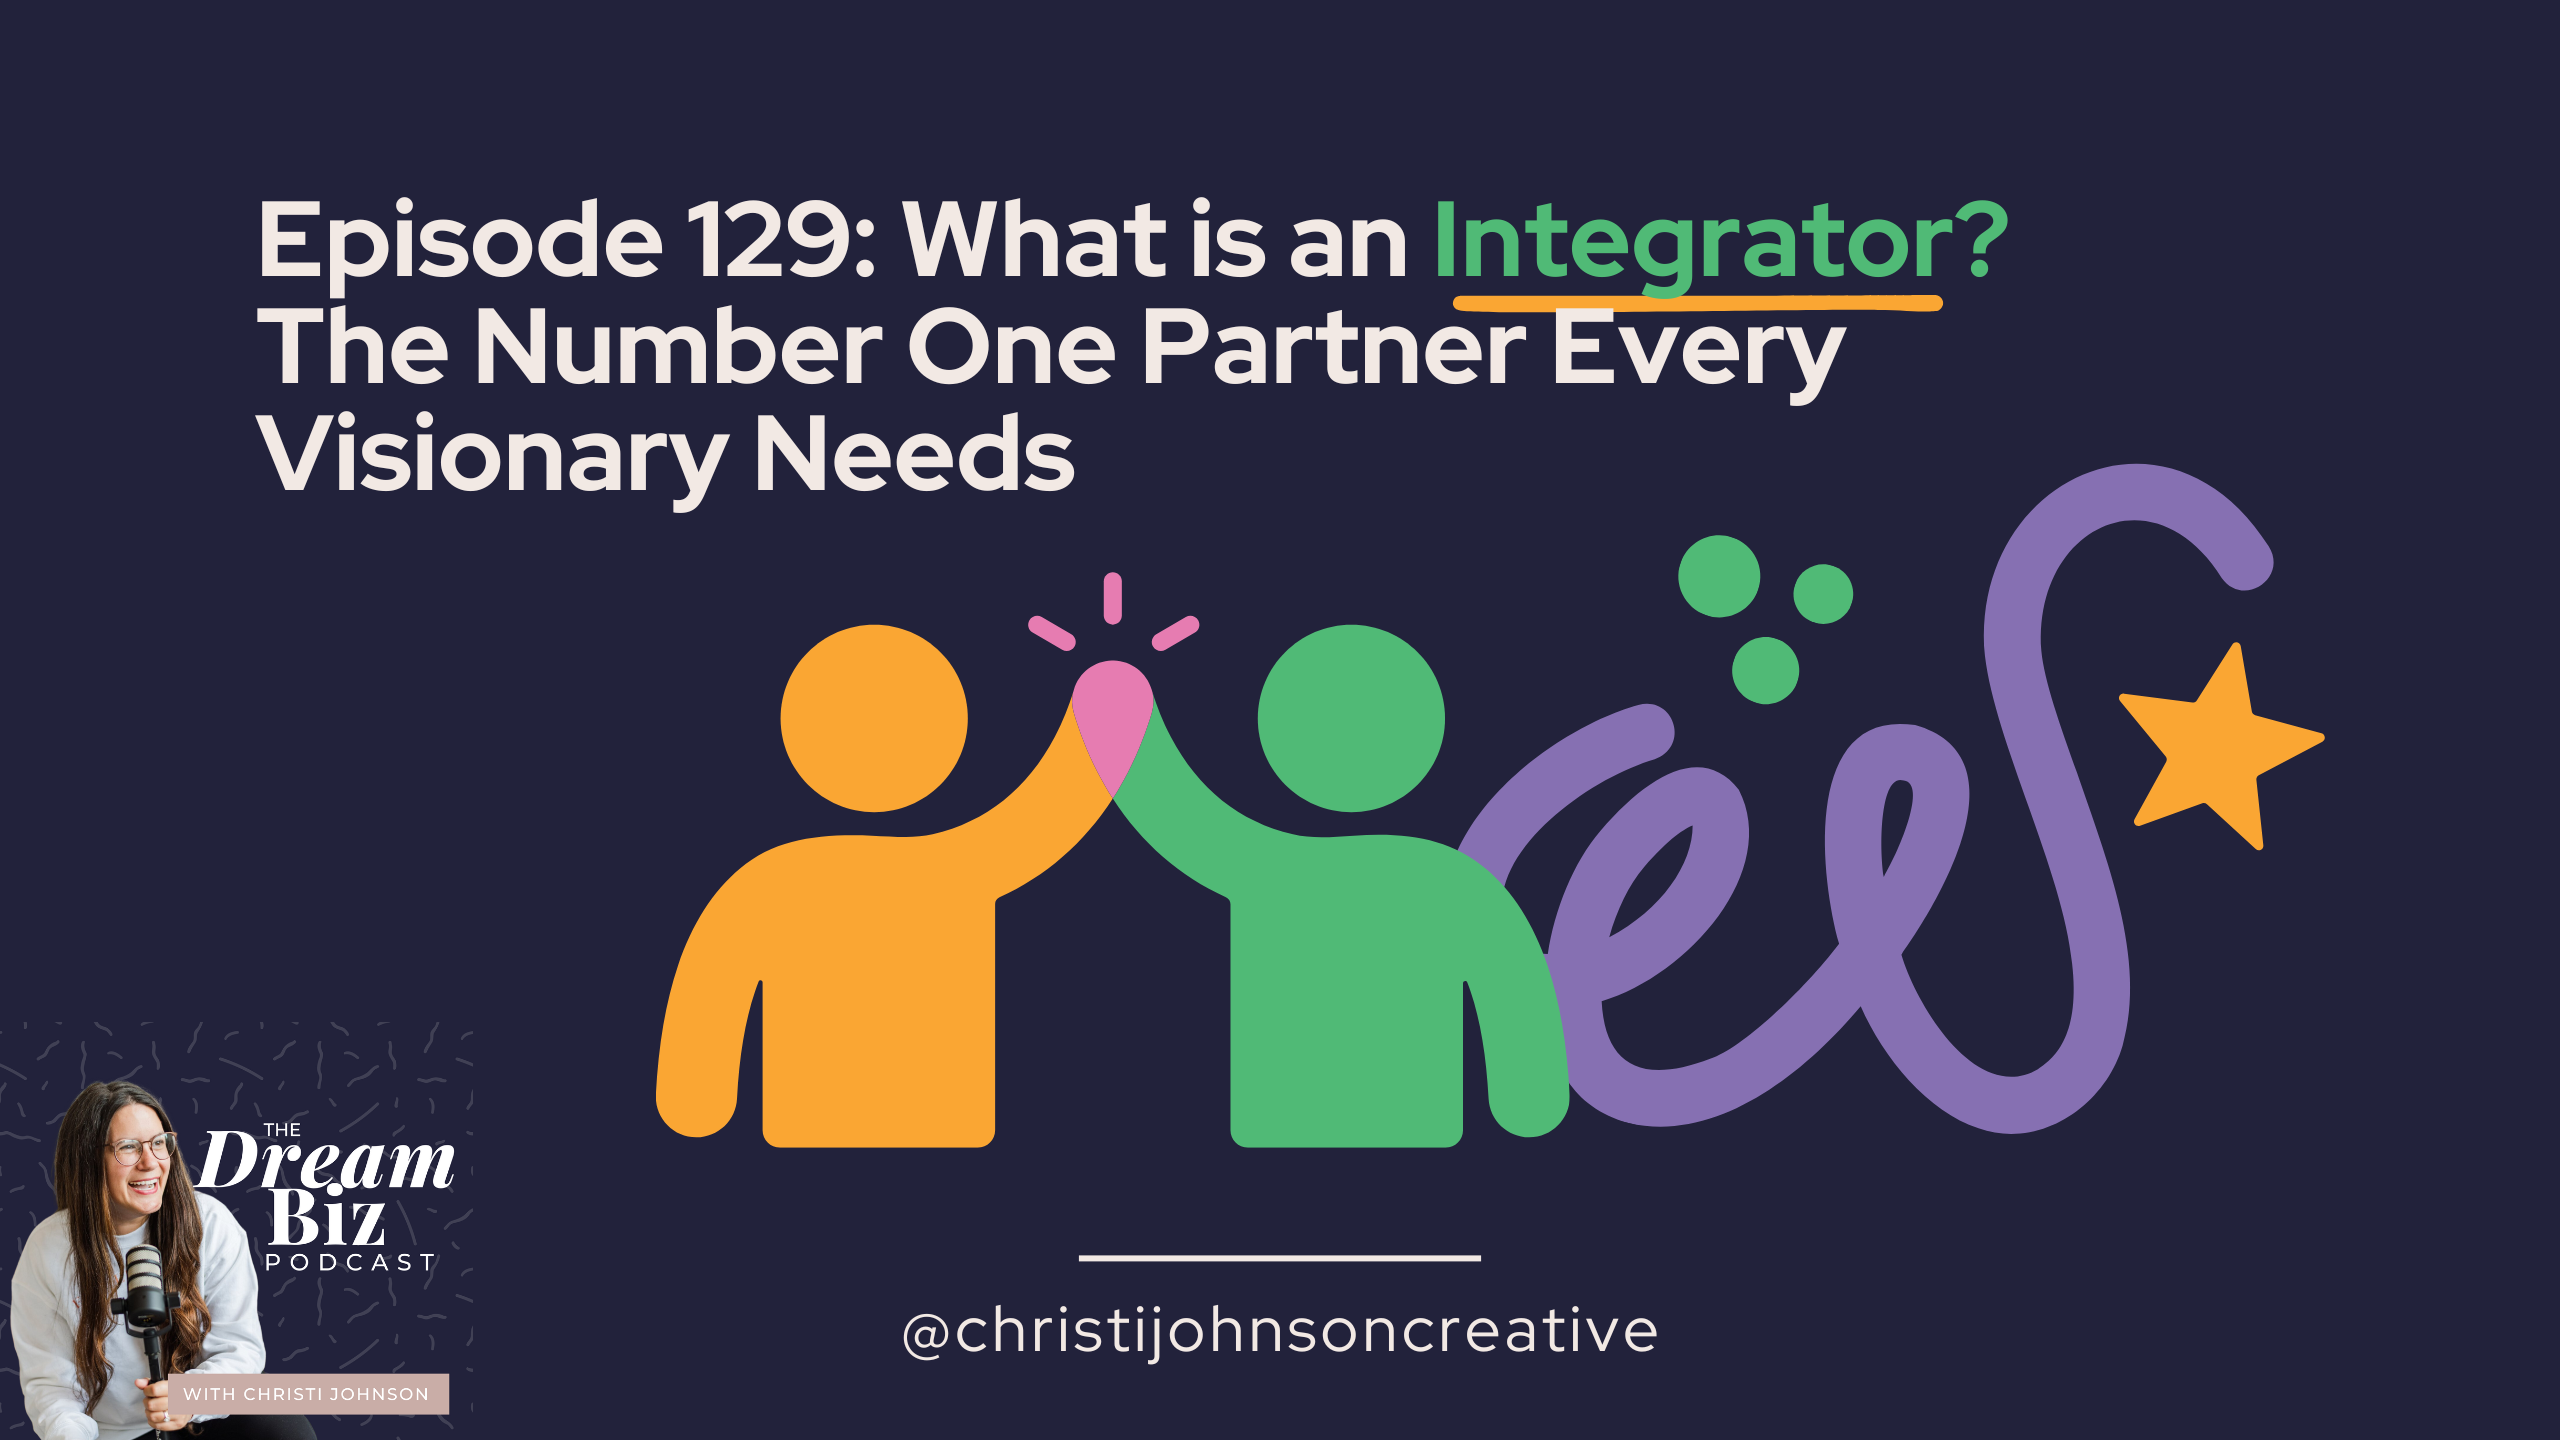 ID: Episode 129: What is an integrator? The Number One Partner Every Visionary needs.